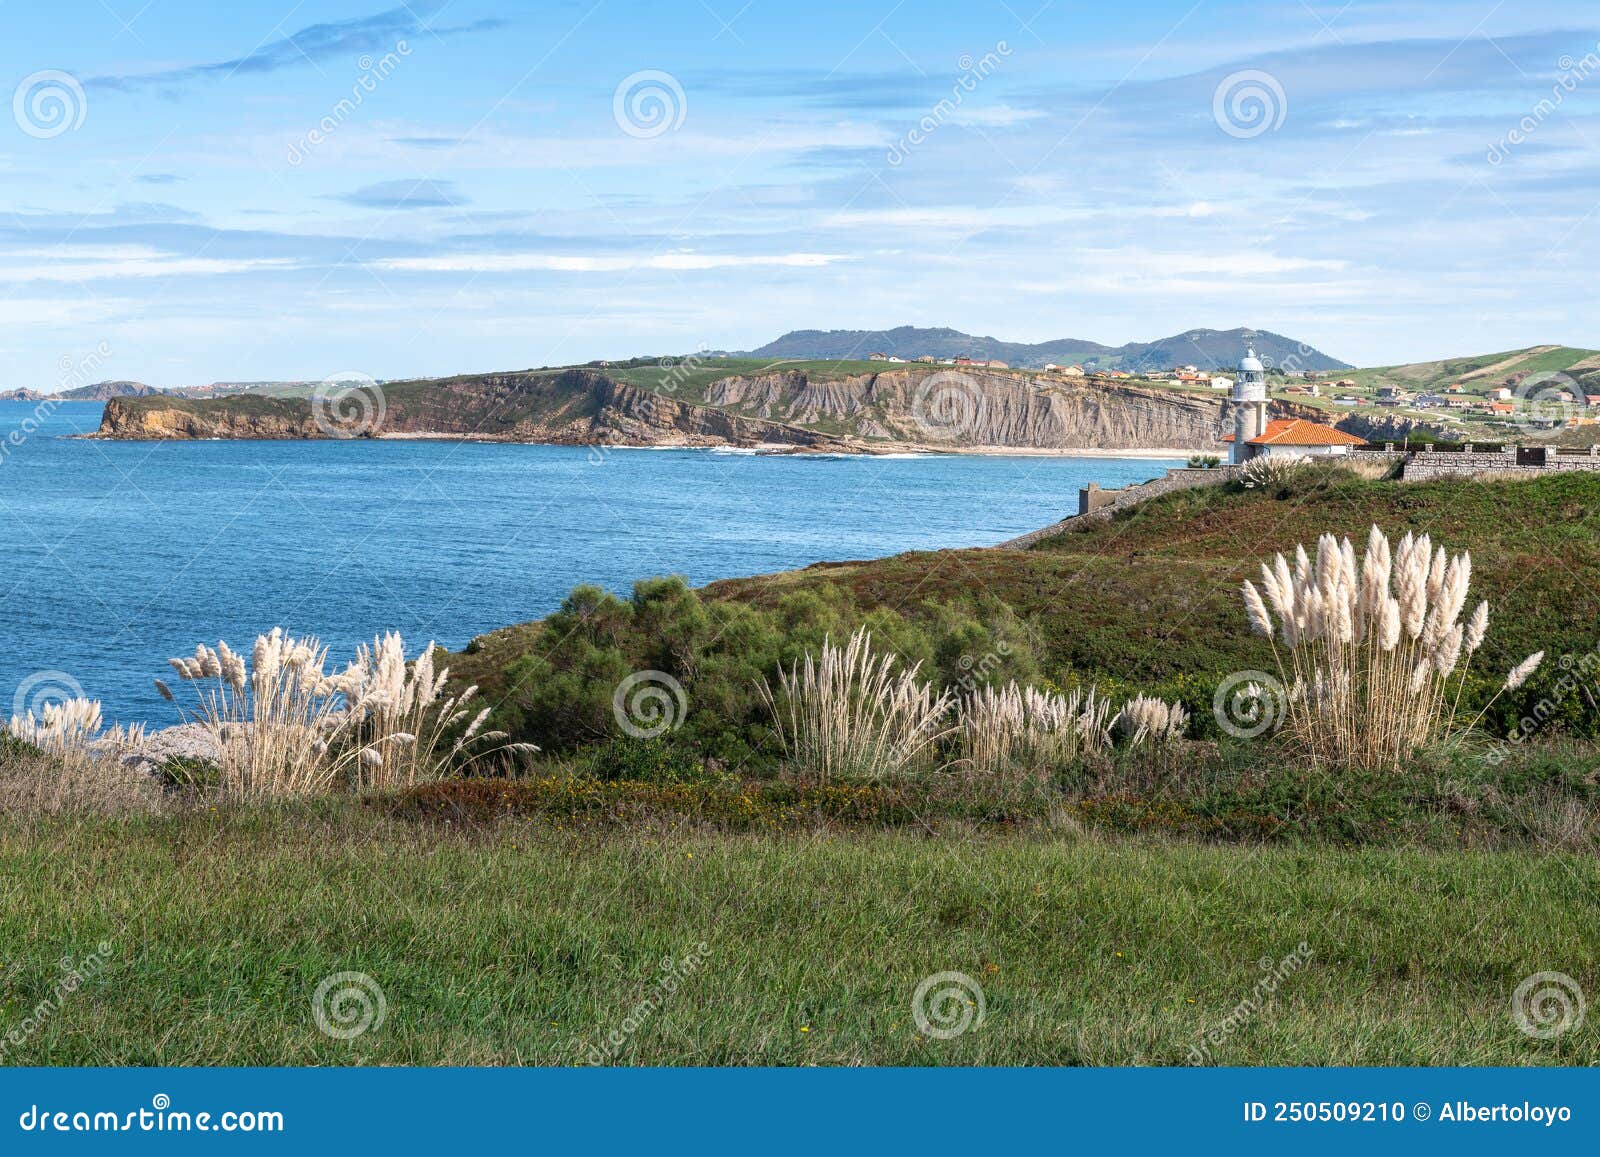 lighthouse of punta del torco de afuera in suances, cantabria, spain